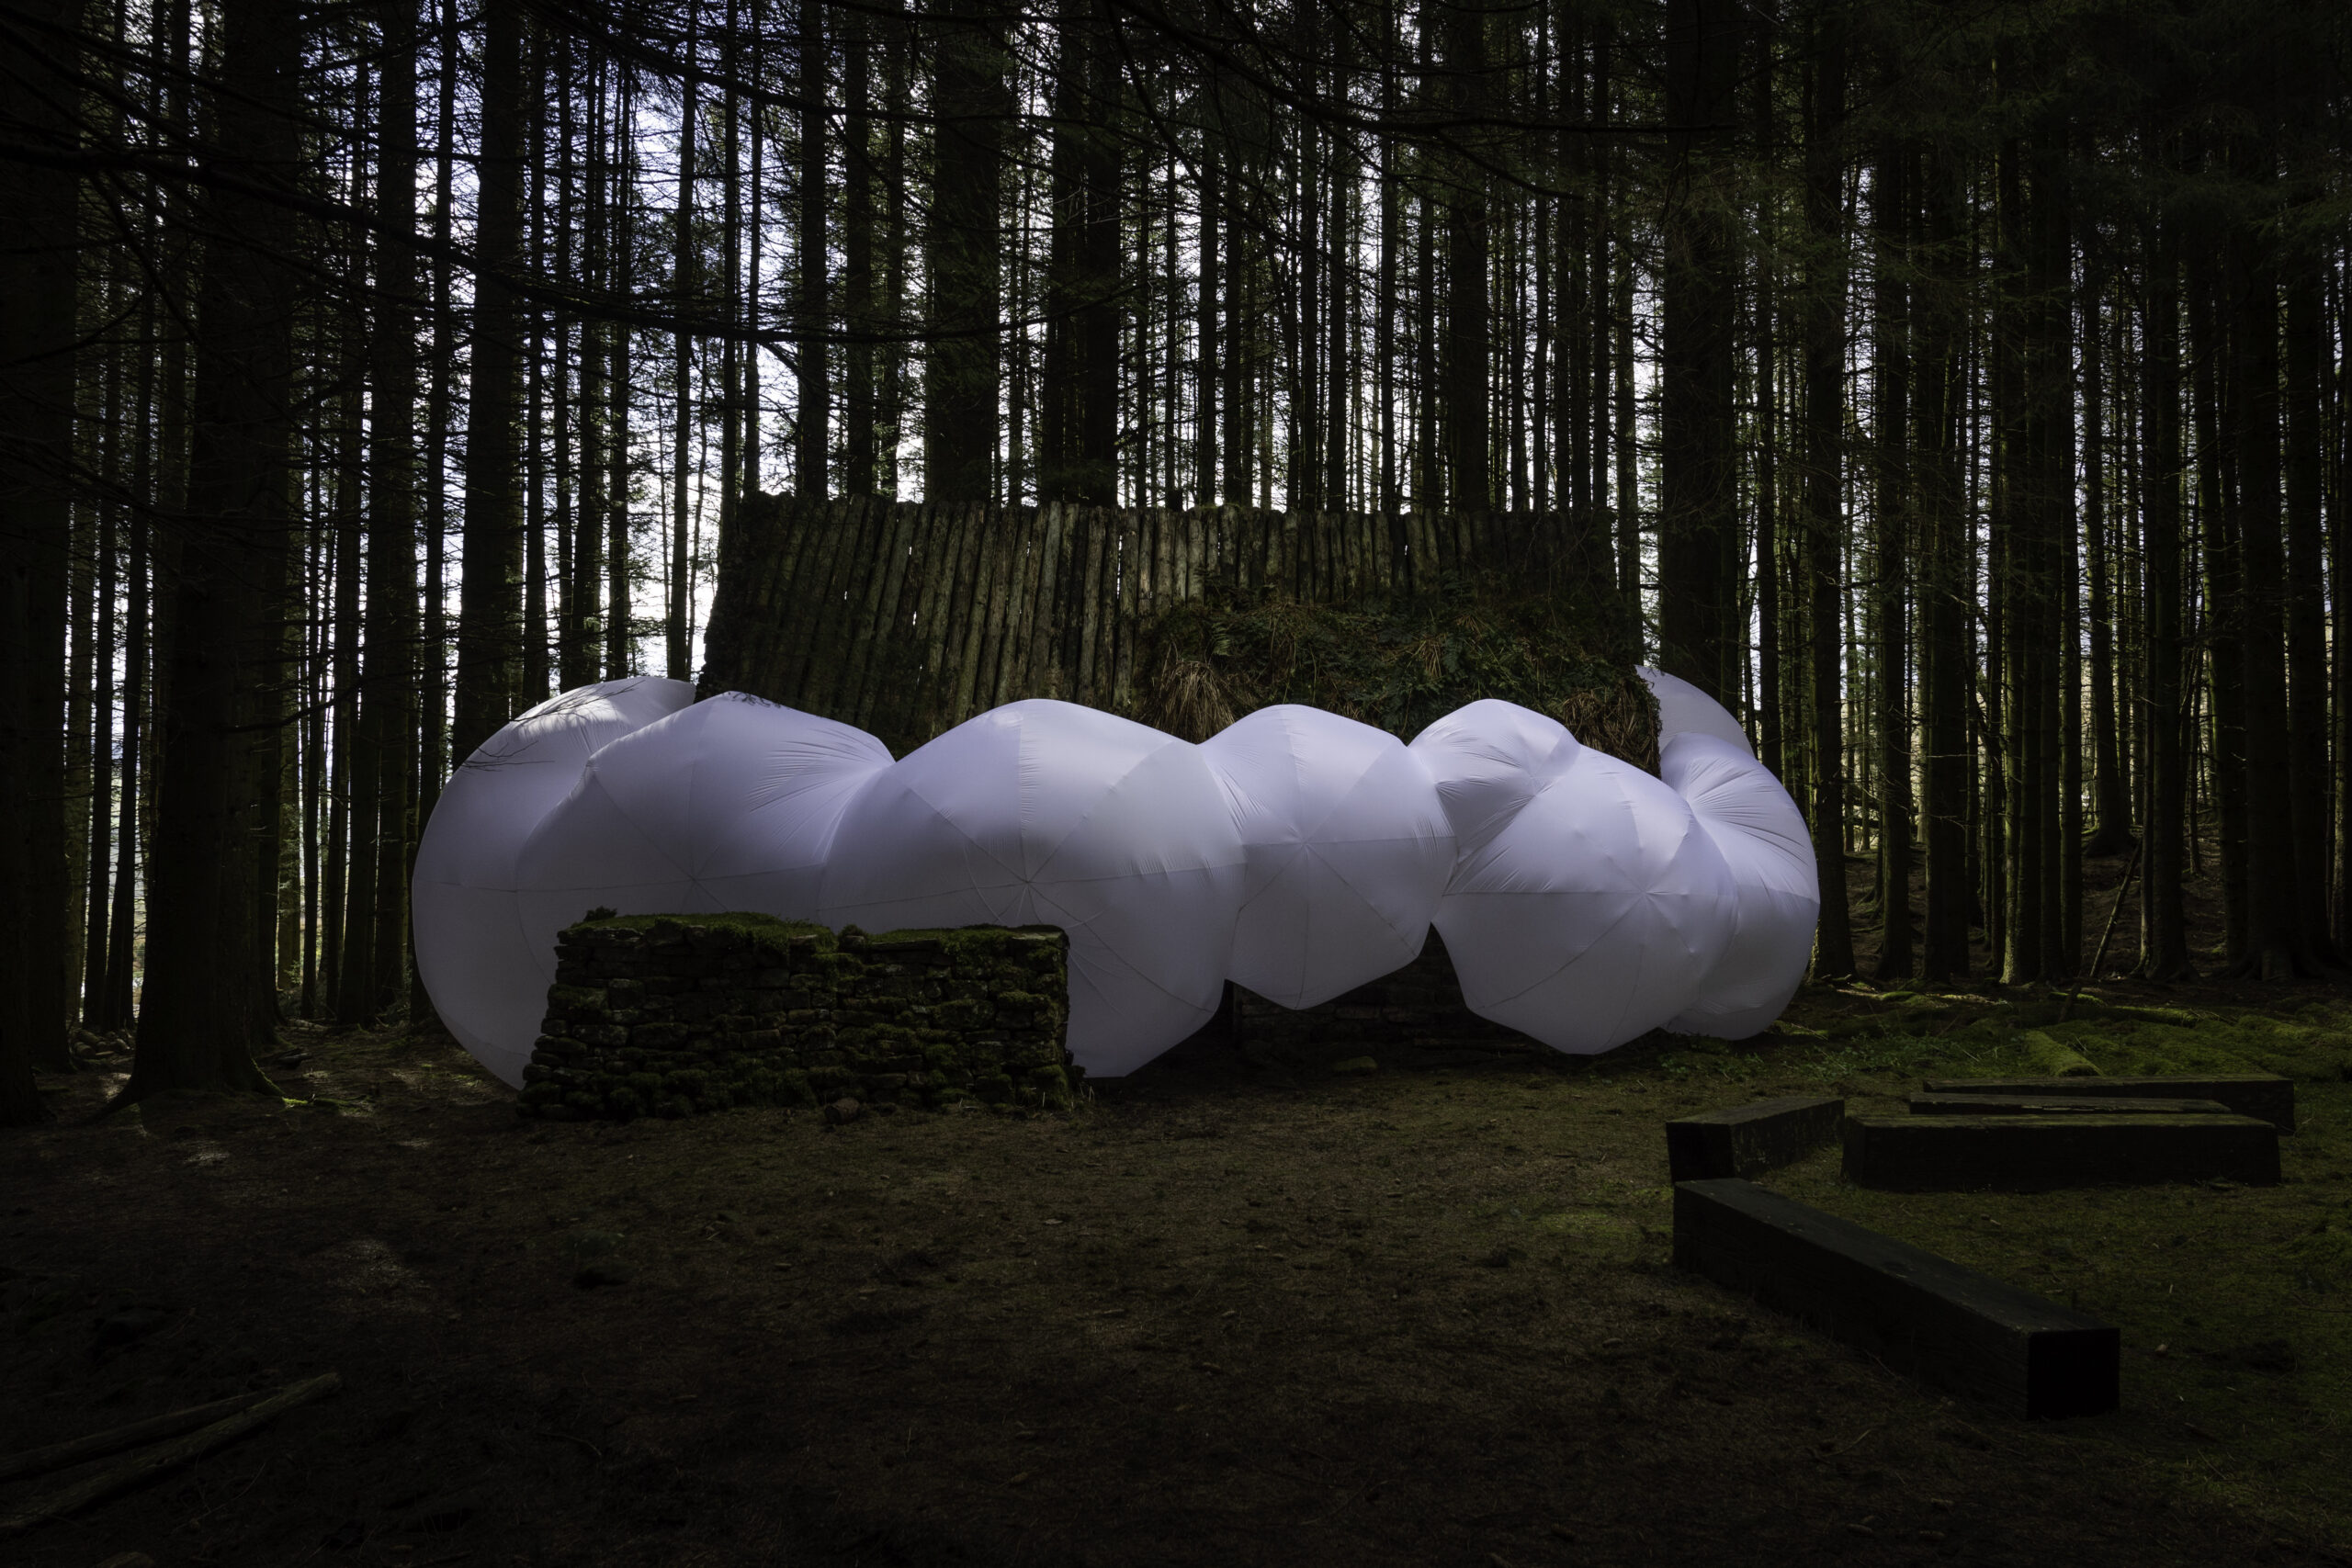 An inflatable sculpture around a cottage in the woods.